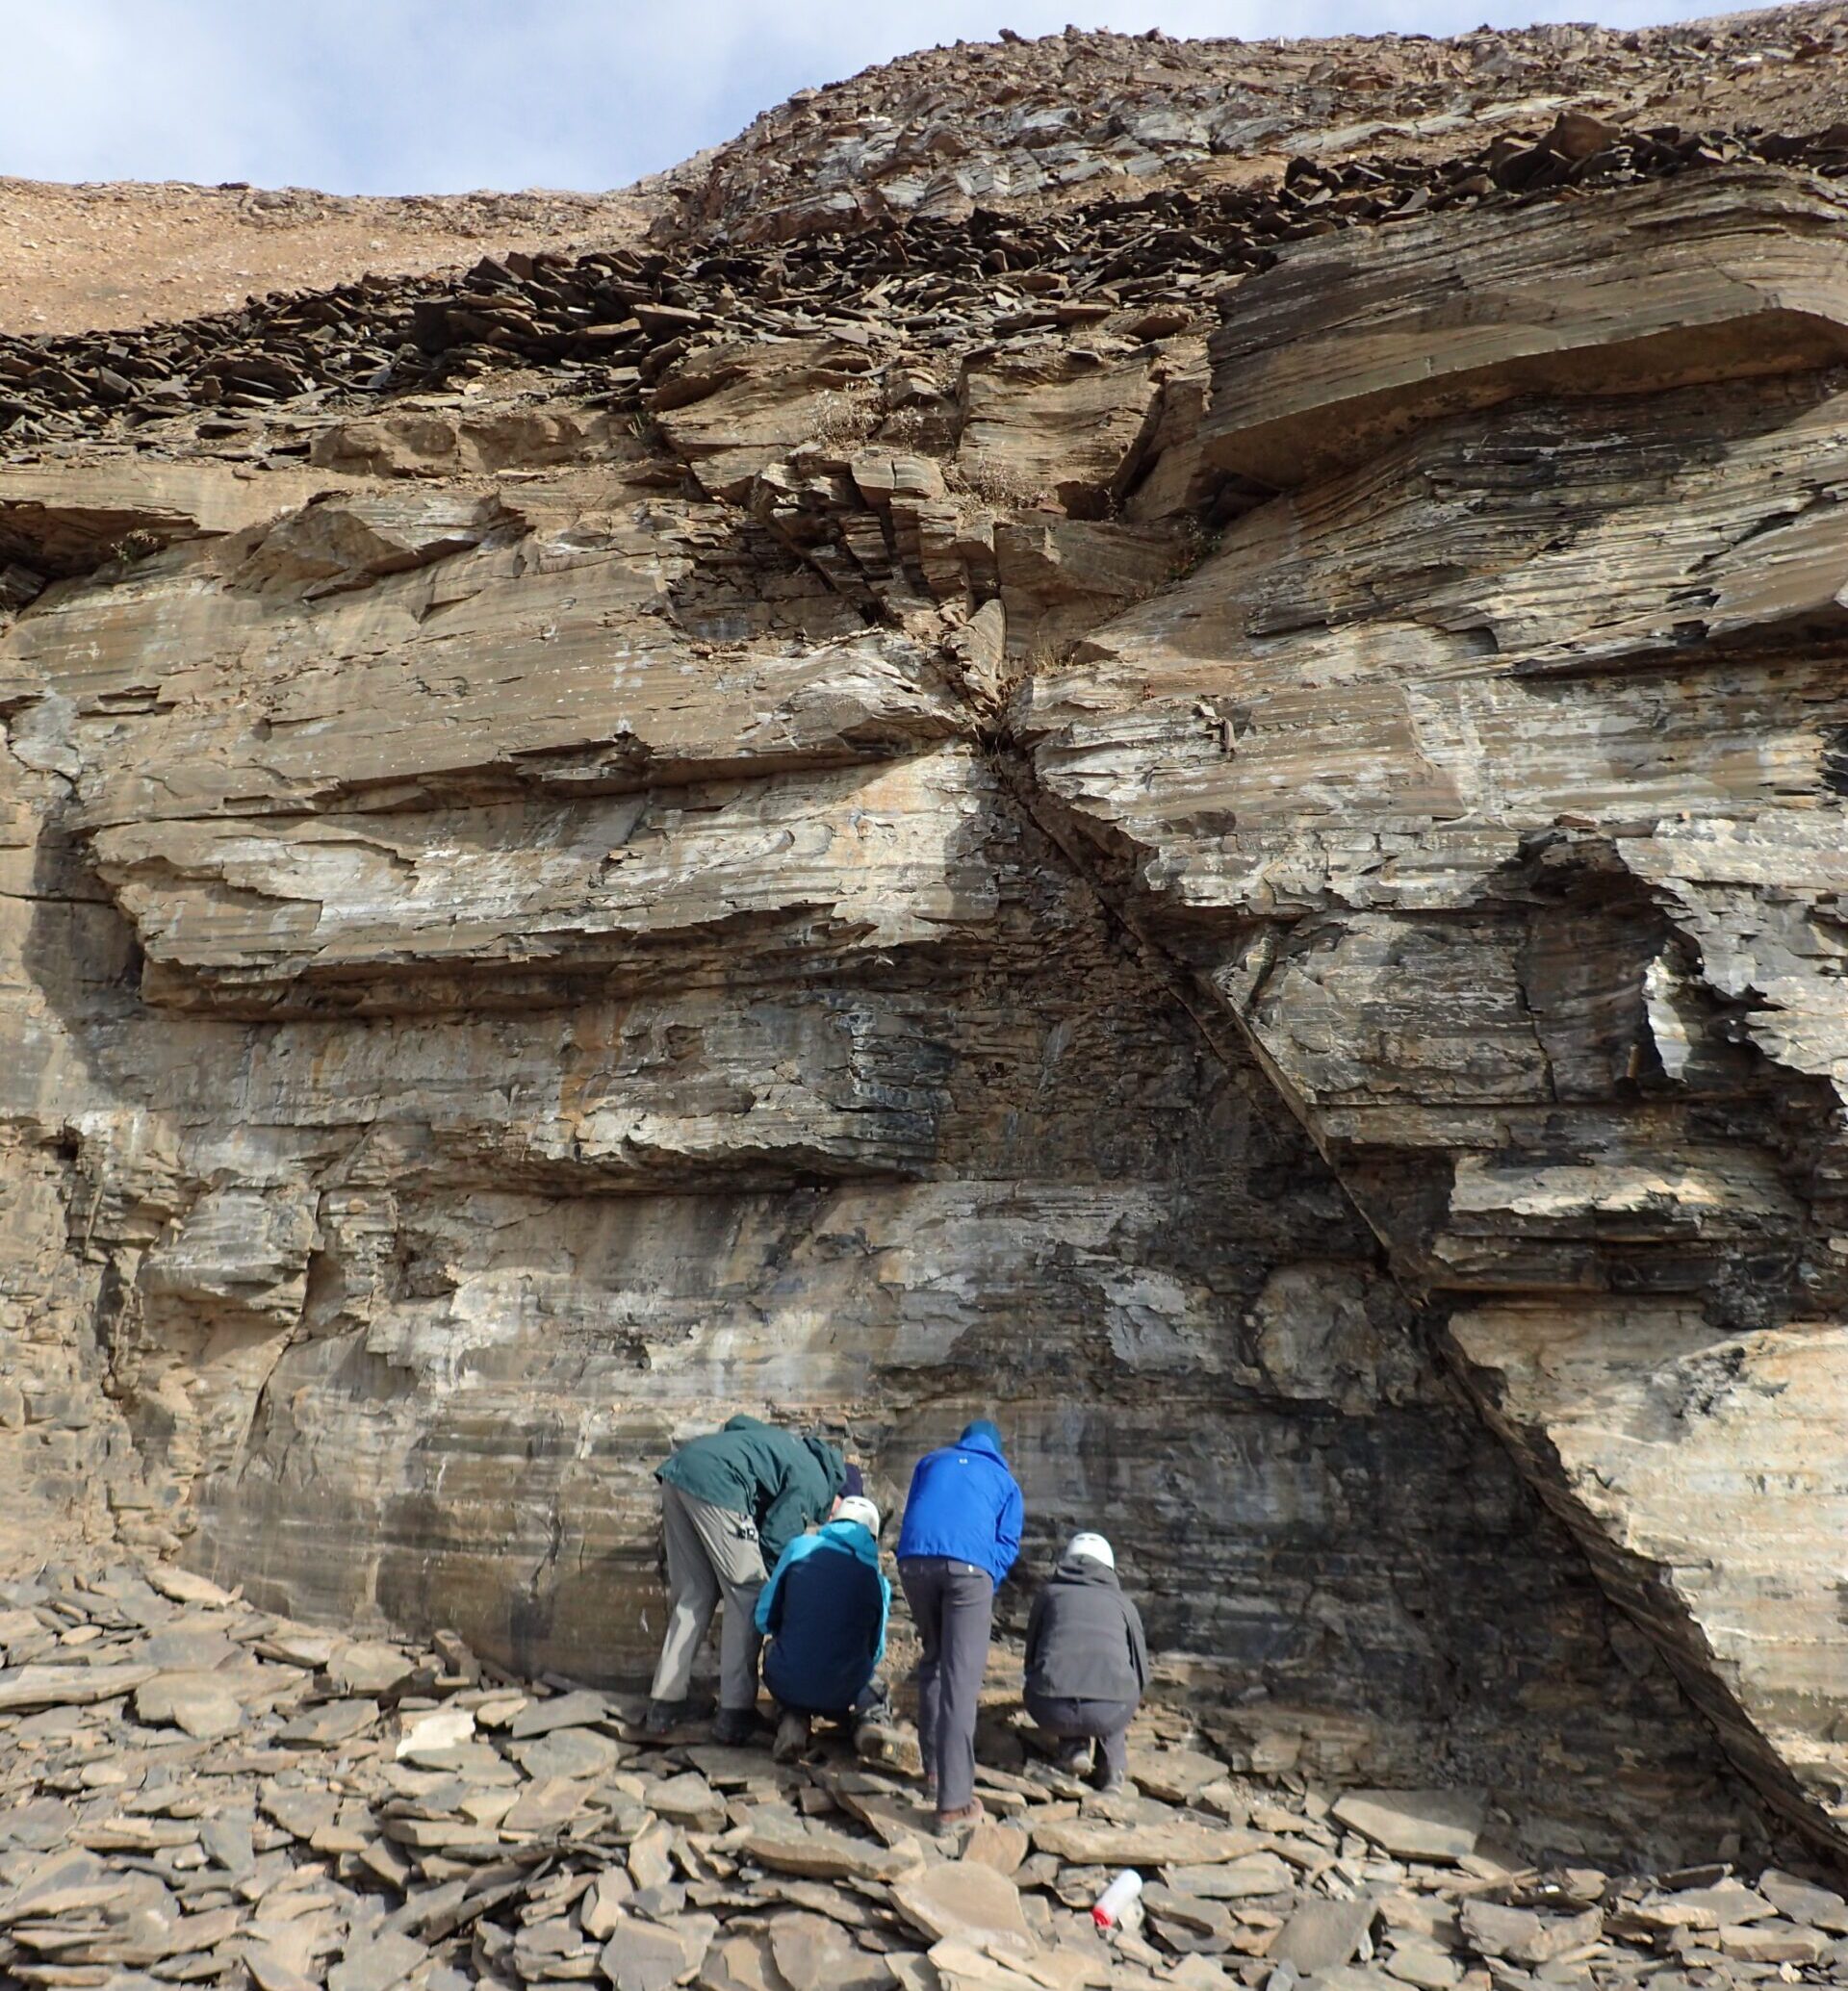 Four people viewing a fossil in Walcott's quarry. The face of the quarry is a vertical cliff about 8 meters high